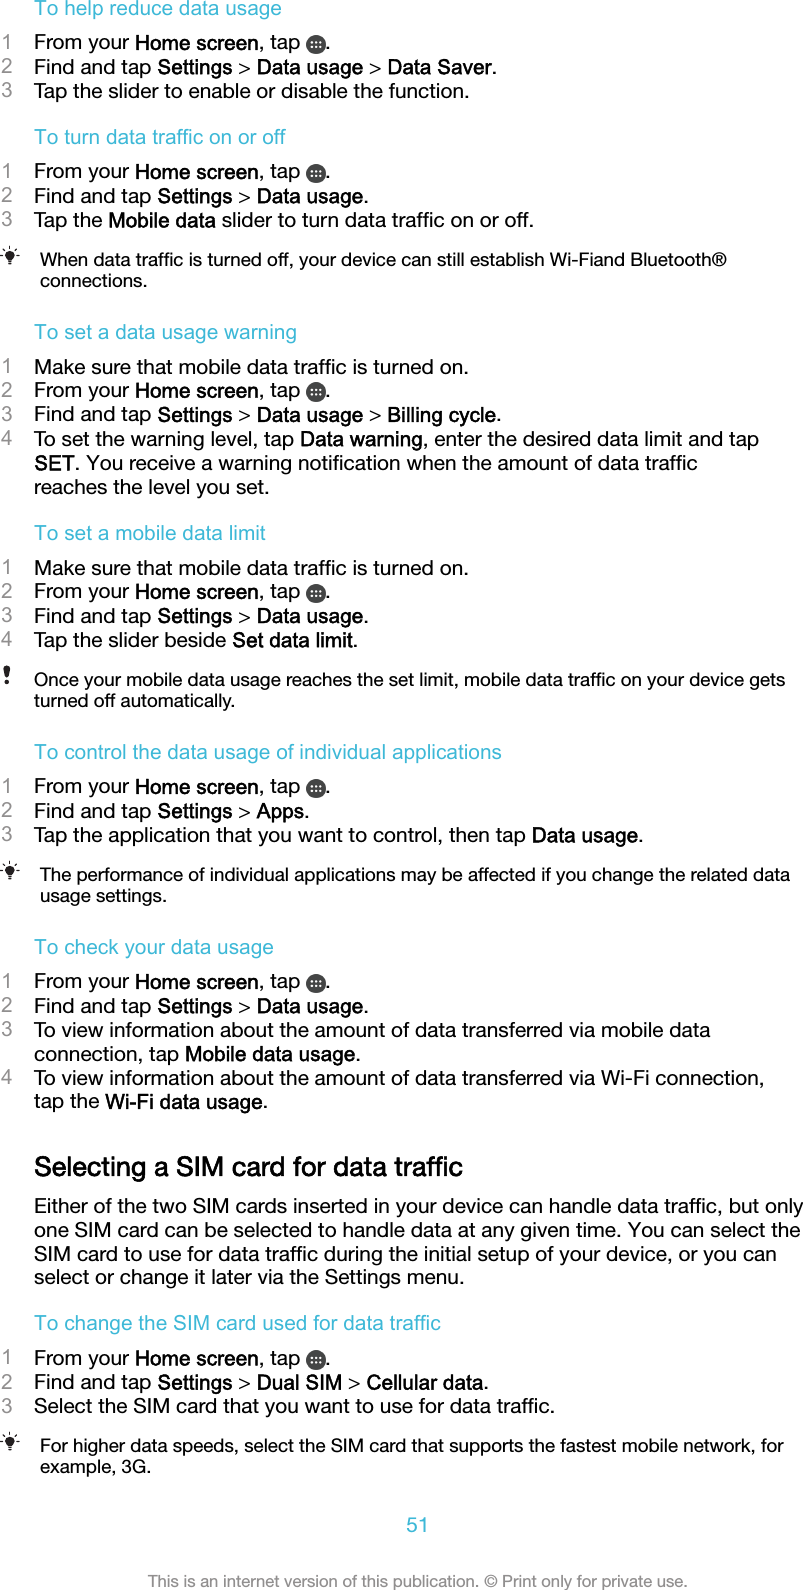 To help reduce data usage1From your Home screen, tap  .2Find and tap Settings &gt; Data usage &gt; Data Saver.3Tap the slider to enable or disable the function.To turn data traffic on or off1From your Home screen, tap  .2Find and tap Settings &gt; Data usage.3Tap the Mobile data slider to turn data trafﬁc on or off.When data trafﬁc is turned off, your device can still establish Wi-Fiand Bluetooth®connections.To set a data usage warning1Make sure that mobile data trafﬁc is turned on.2From your Home screen, tap  .3Find and tap Settings &gt; Data usage &gt; Billing cycle.4To set the warning level, tap Data warning, enter the desired data limit and tapSET. You receive a warning notiﬁcation when the amount of data trafﬁcreaches the level you set.To set a mobile data limit1Make sure that mobile data trafﬁc is turned on.2From your Home screen, tap  .3Find and tap Settings &gt; Data usage.4Tap the slider beside Set data limit.Once your mobile data usage reaches the set limit, mobile data trafﬁc on your device getsturned off automatically.To control the data usage of individual applications1From your Home screen, tap  .2Find and tap Settings &gt; Apps.3Tap the application that you want to control, then tap Data usage.The performance of individual applications may be affected if you change the related datausage settings.To check your data usage1From your Home screen, tap  .2Find and tap Settings &gt; Data usage.3To view information about the amount of data transferred via mobile dataconnection, tap Mobile data usage.4To view information about the amount of data transferred via Wi-Fi connection,tap the Wi-Fi data usage.Selecting a SIM card for data trafﬁcEither of the two SIM cards inserted in your device can handle data trafﬁc, but onlyone SIM card can be selected to handle data at any given time. You can select theSIM card to use for data trafﬁc during the initial setup of your device, or you canselect or change it later via the Settings menu.To change the SIM card used for data traffic1From your Home screen, tap  .2Find and tap Settings &gt; Dual SIM &gt; Cellular data.3Select the SIM card that you want to use for data trafﬁc.For higher data speeds, select the SIM card that supports the fastest mobile network, forexample, 3G.51This is an internet version of this publication. © Print only for private use.